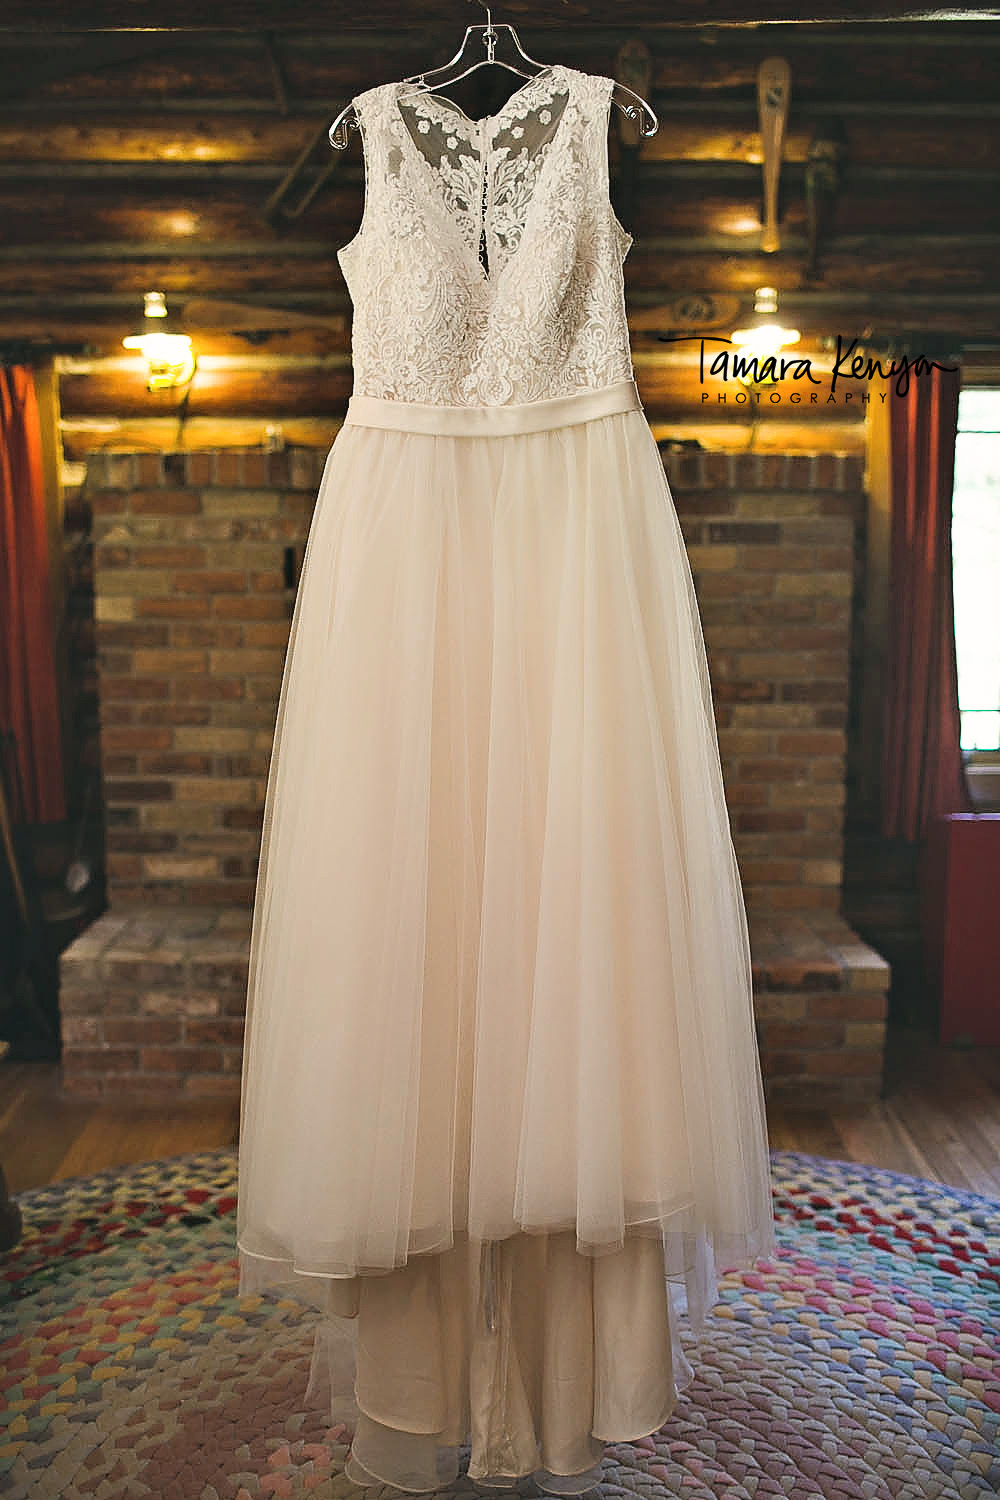 wedding dress hanging in a cabin